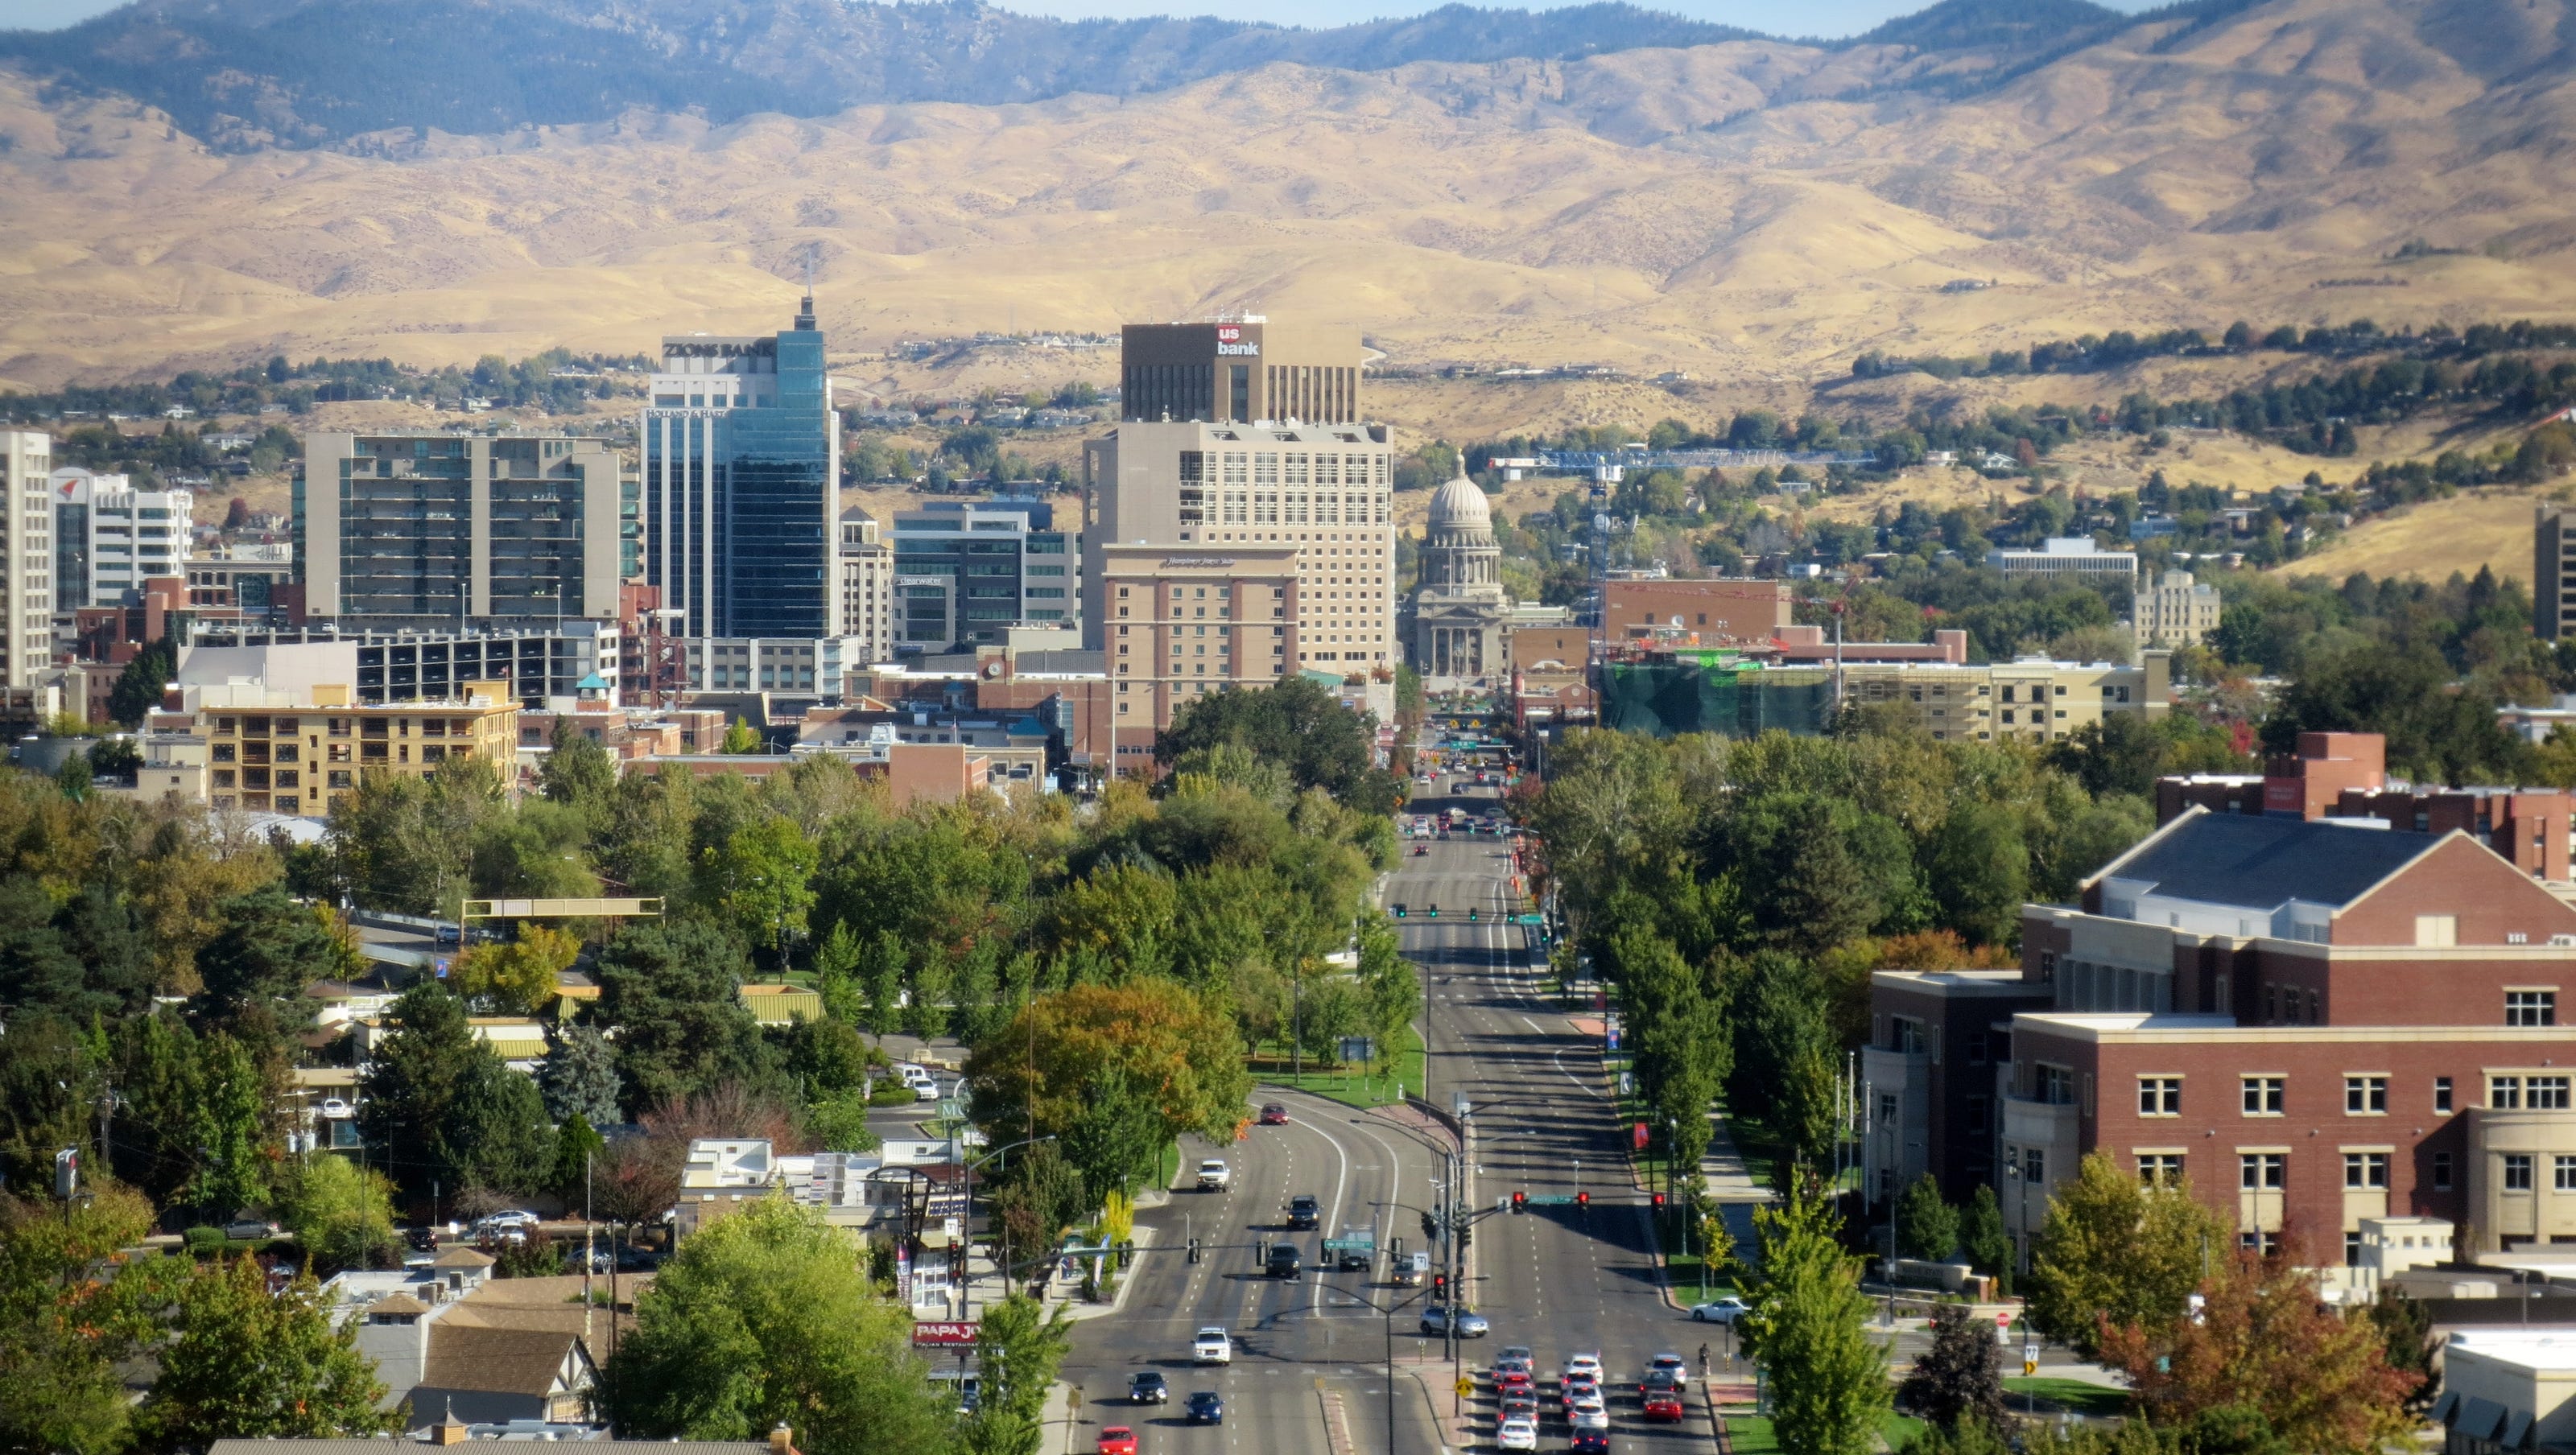 Top 5 things to do in Boise